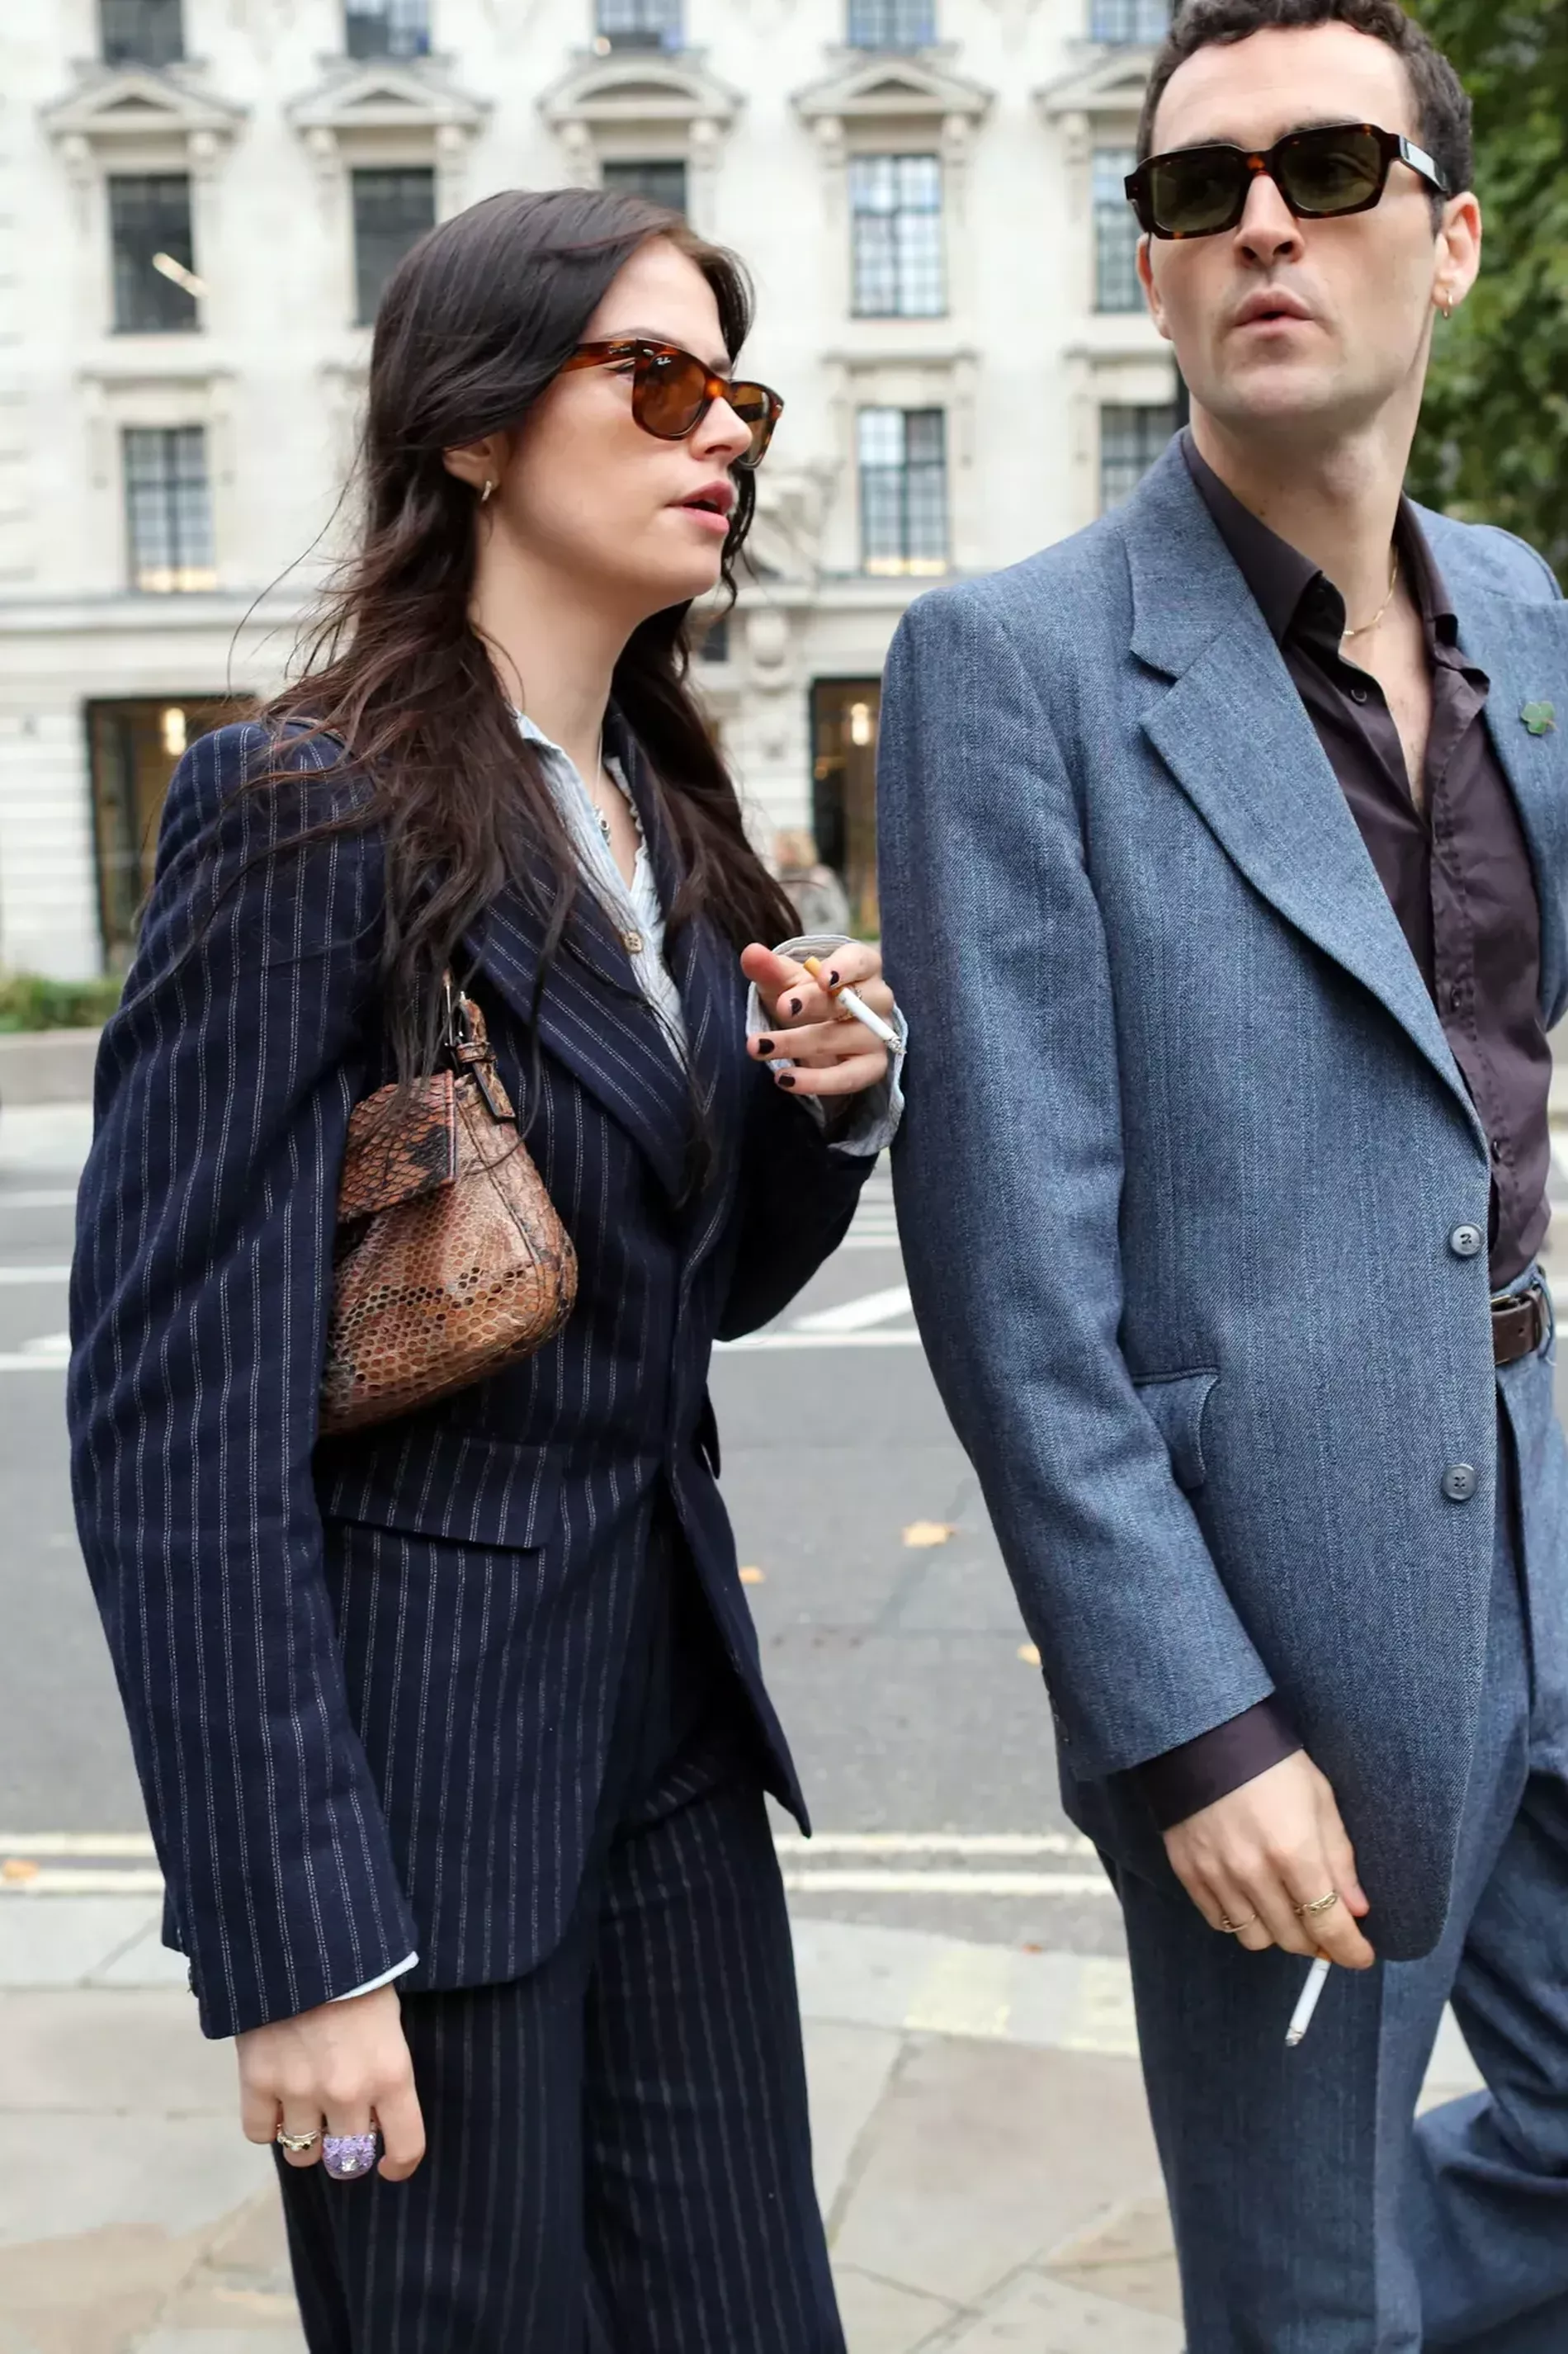 London Fashion Week guest pairs pinstripe suit with brown leather bag and matching sunglasses 